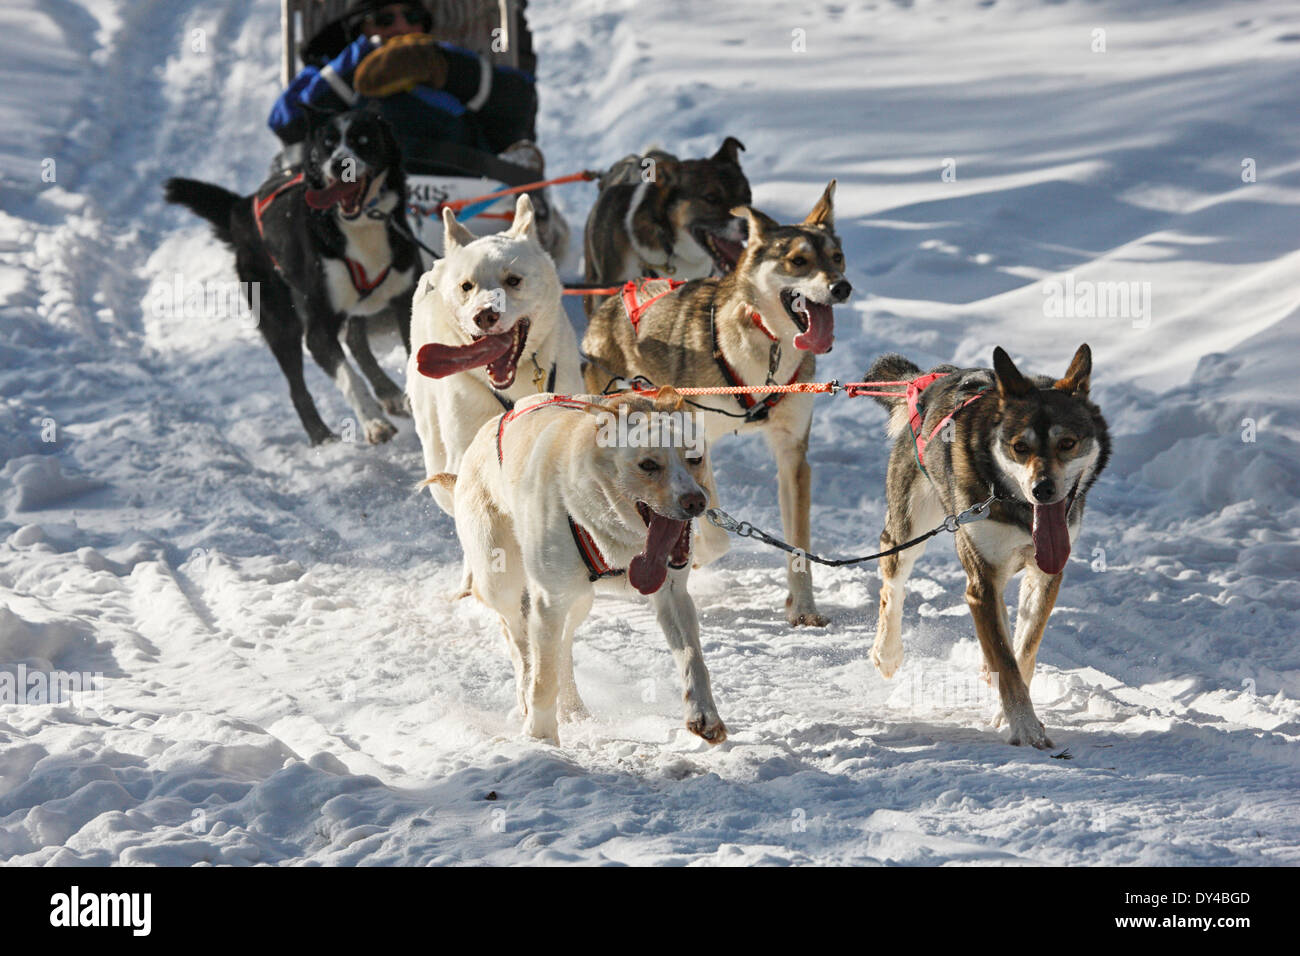 Husky dogs running on the snow in Finland, Lapland Stock Photo